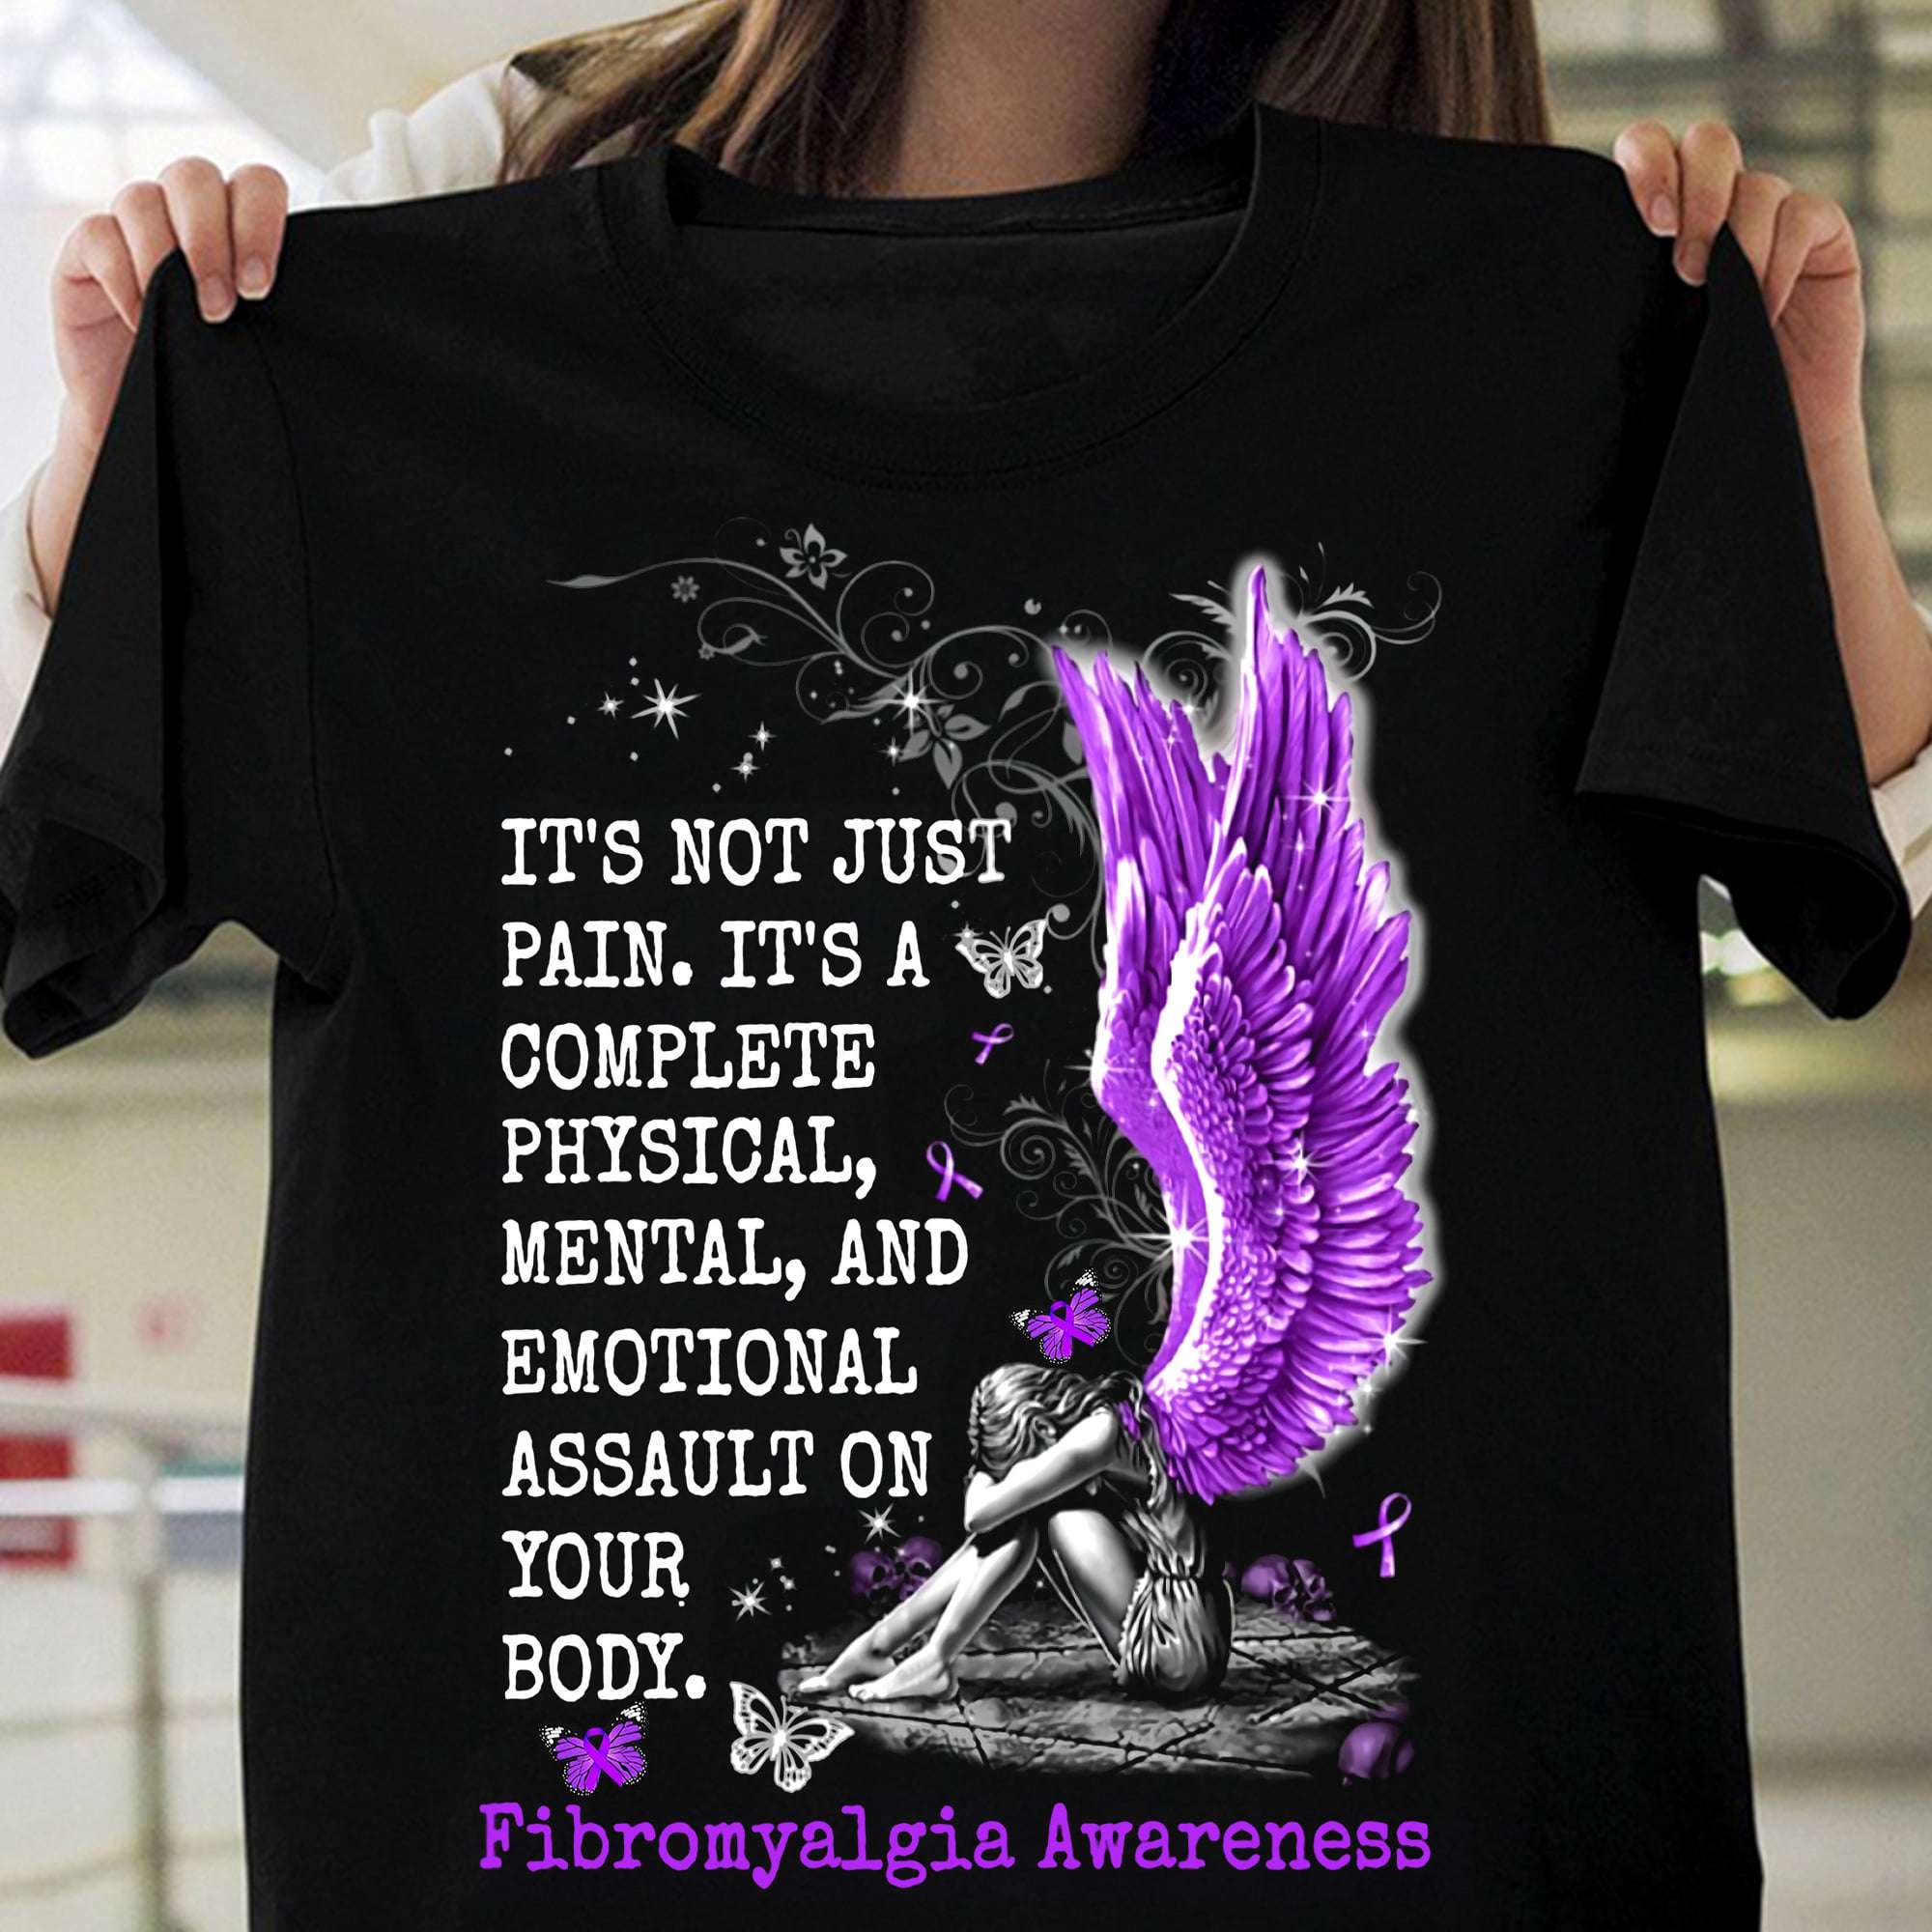 It's not just pain, it's a complete physical and emotional assault on your body - Fibromyalgia awareness, girl with wings